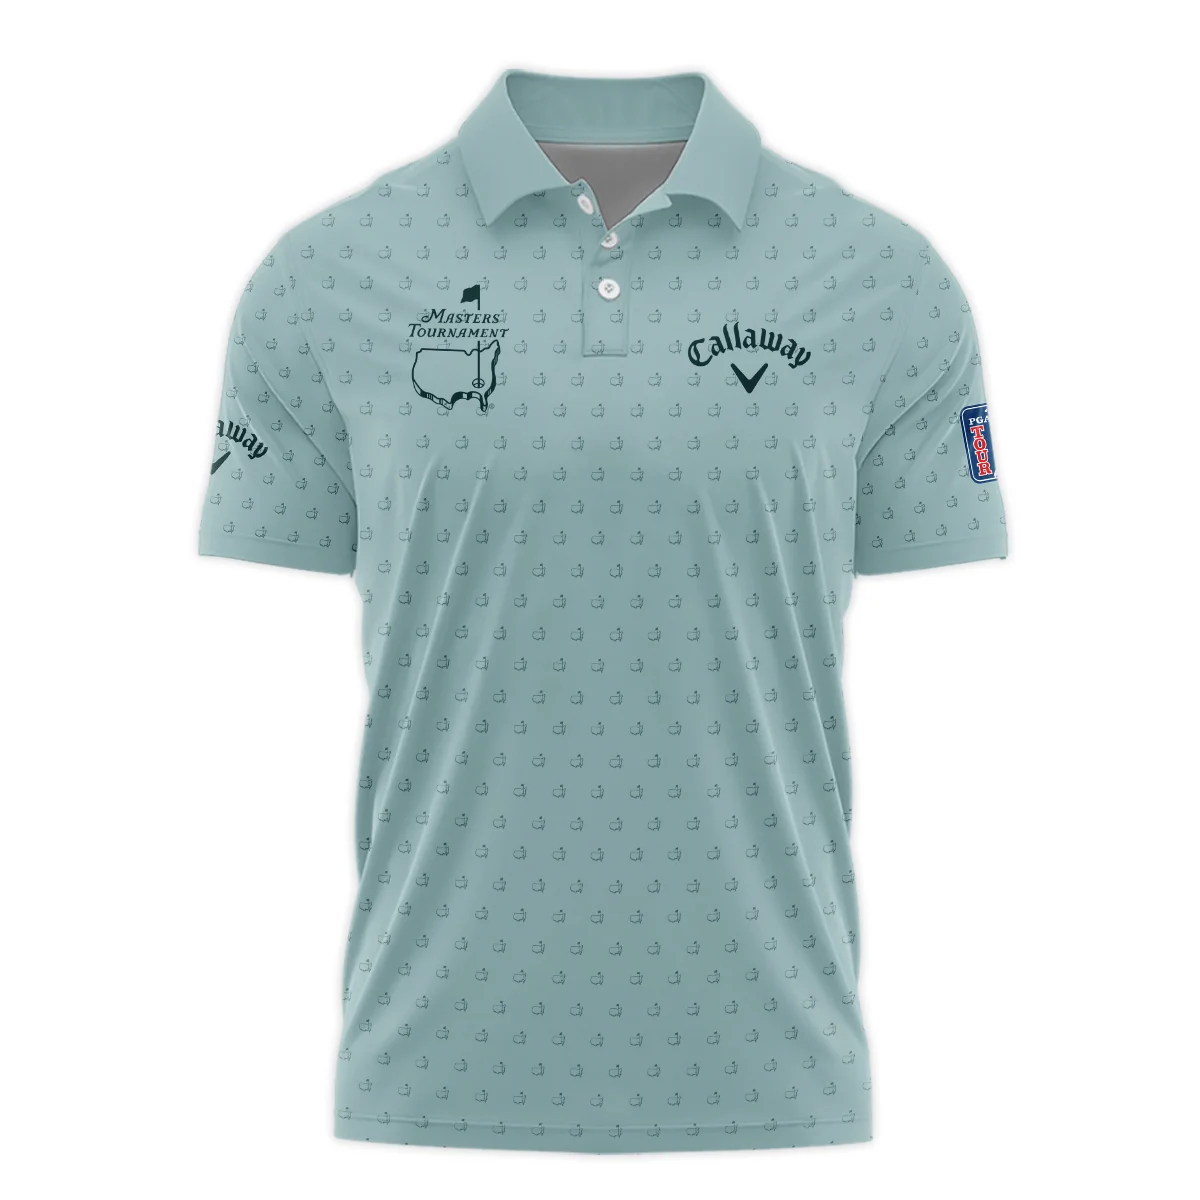 Golf Pattern Masters Tournament Callaway Polo Shirt Cyan Pattern All Over Print Polo Shirt For Men